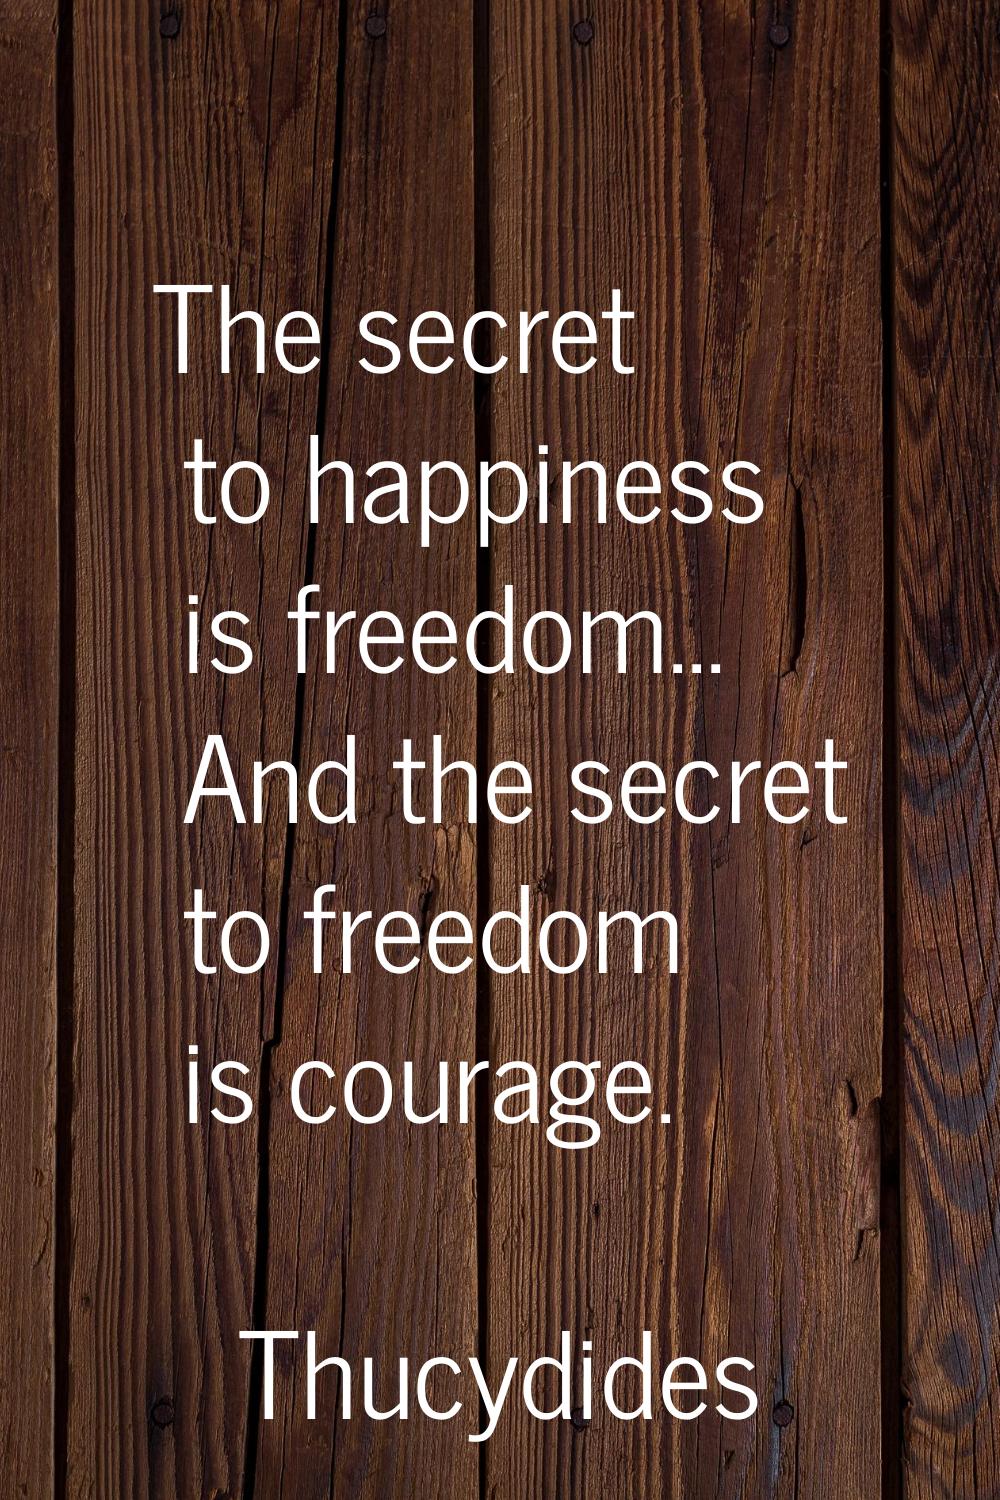 The secret to happiness is freedom... And the secret to freedom is courage.